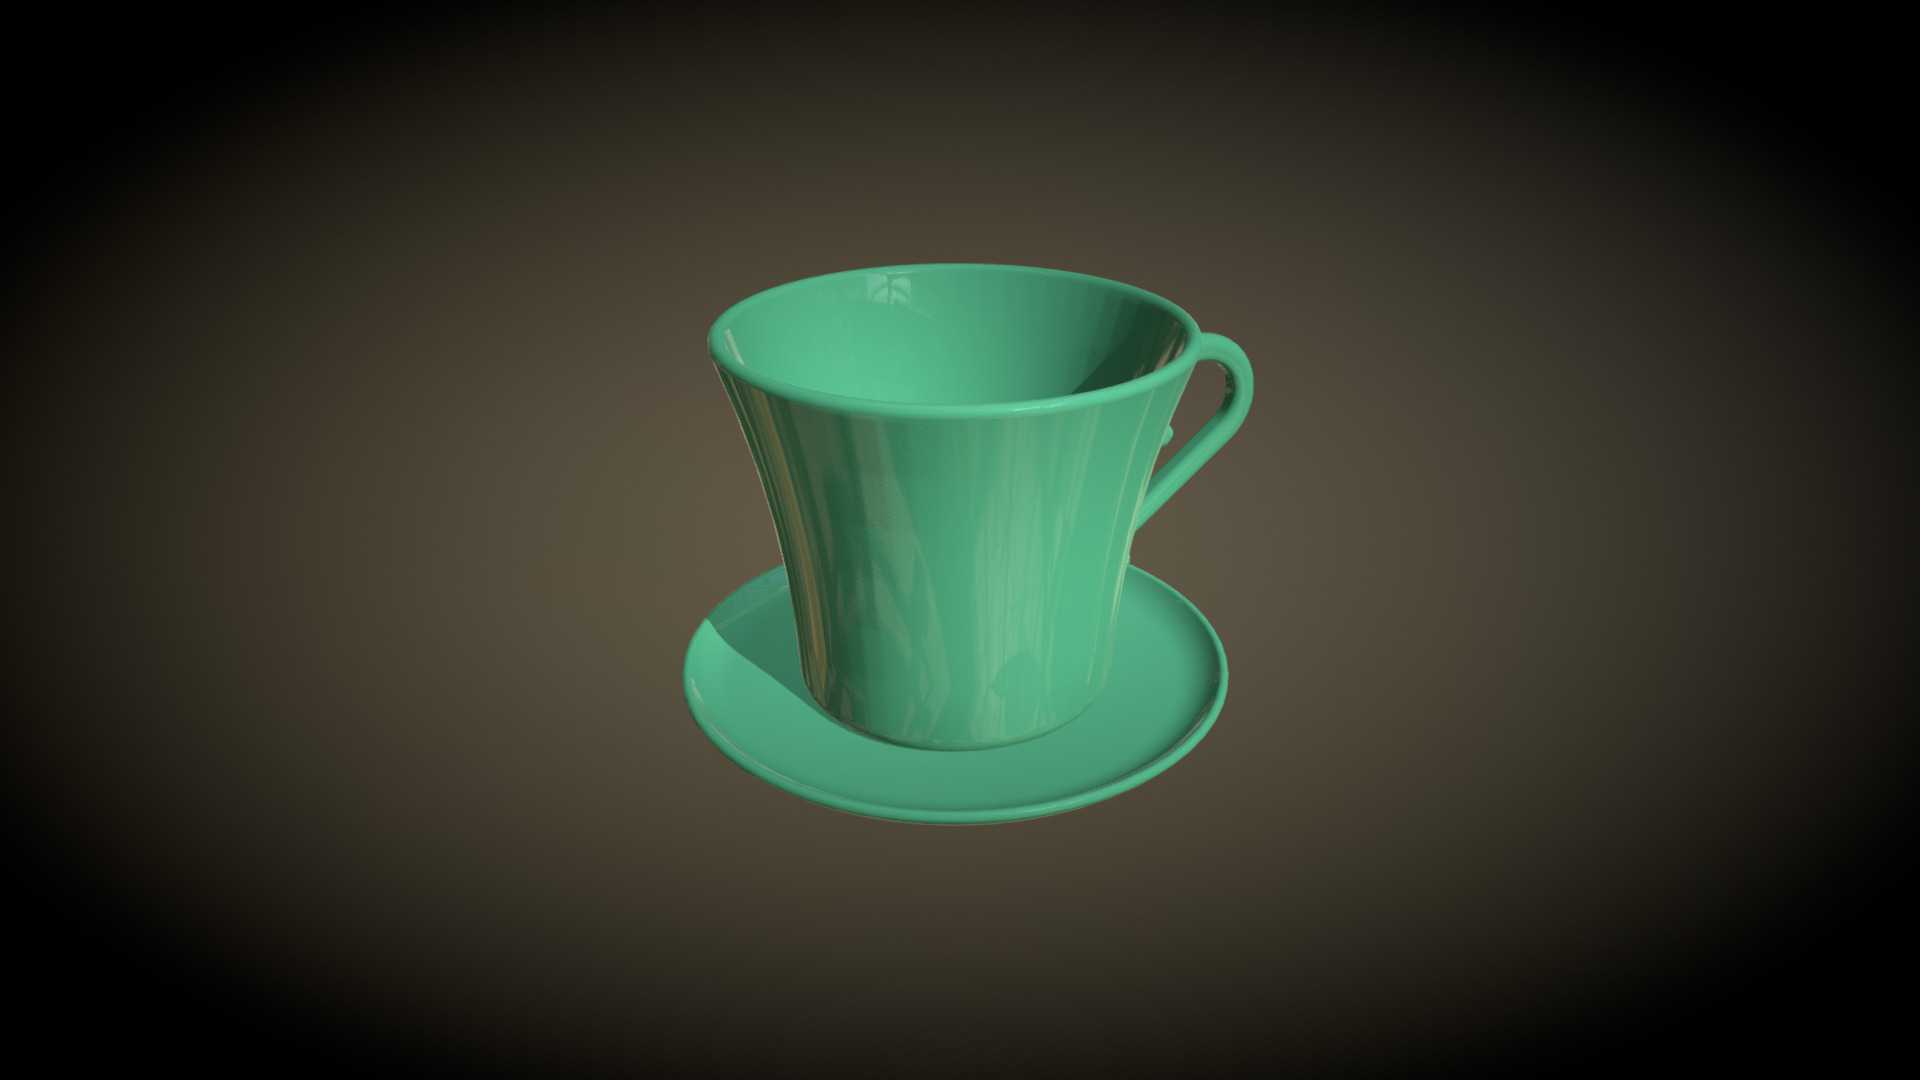 3D model Cup - This is a 3D model of the Cup. The 3D model is about a green cup on a green plate.